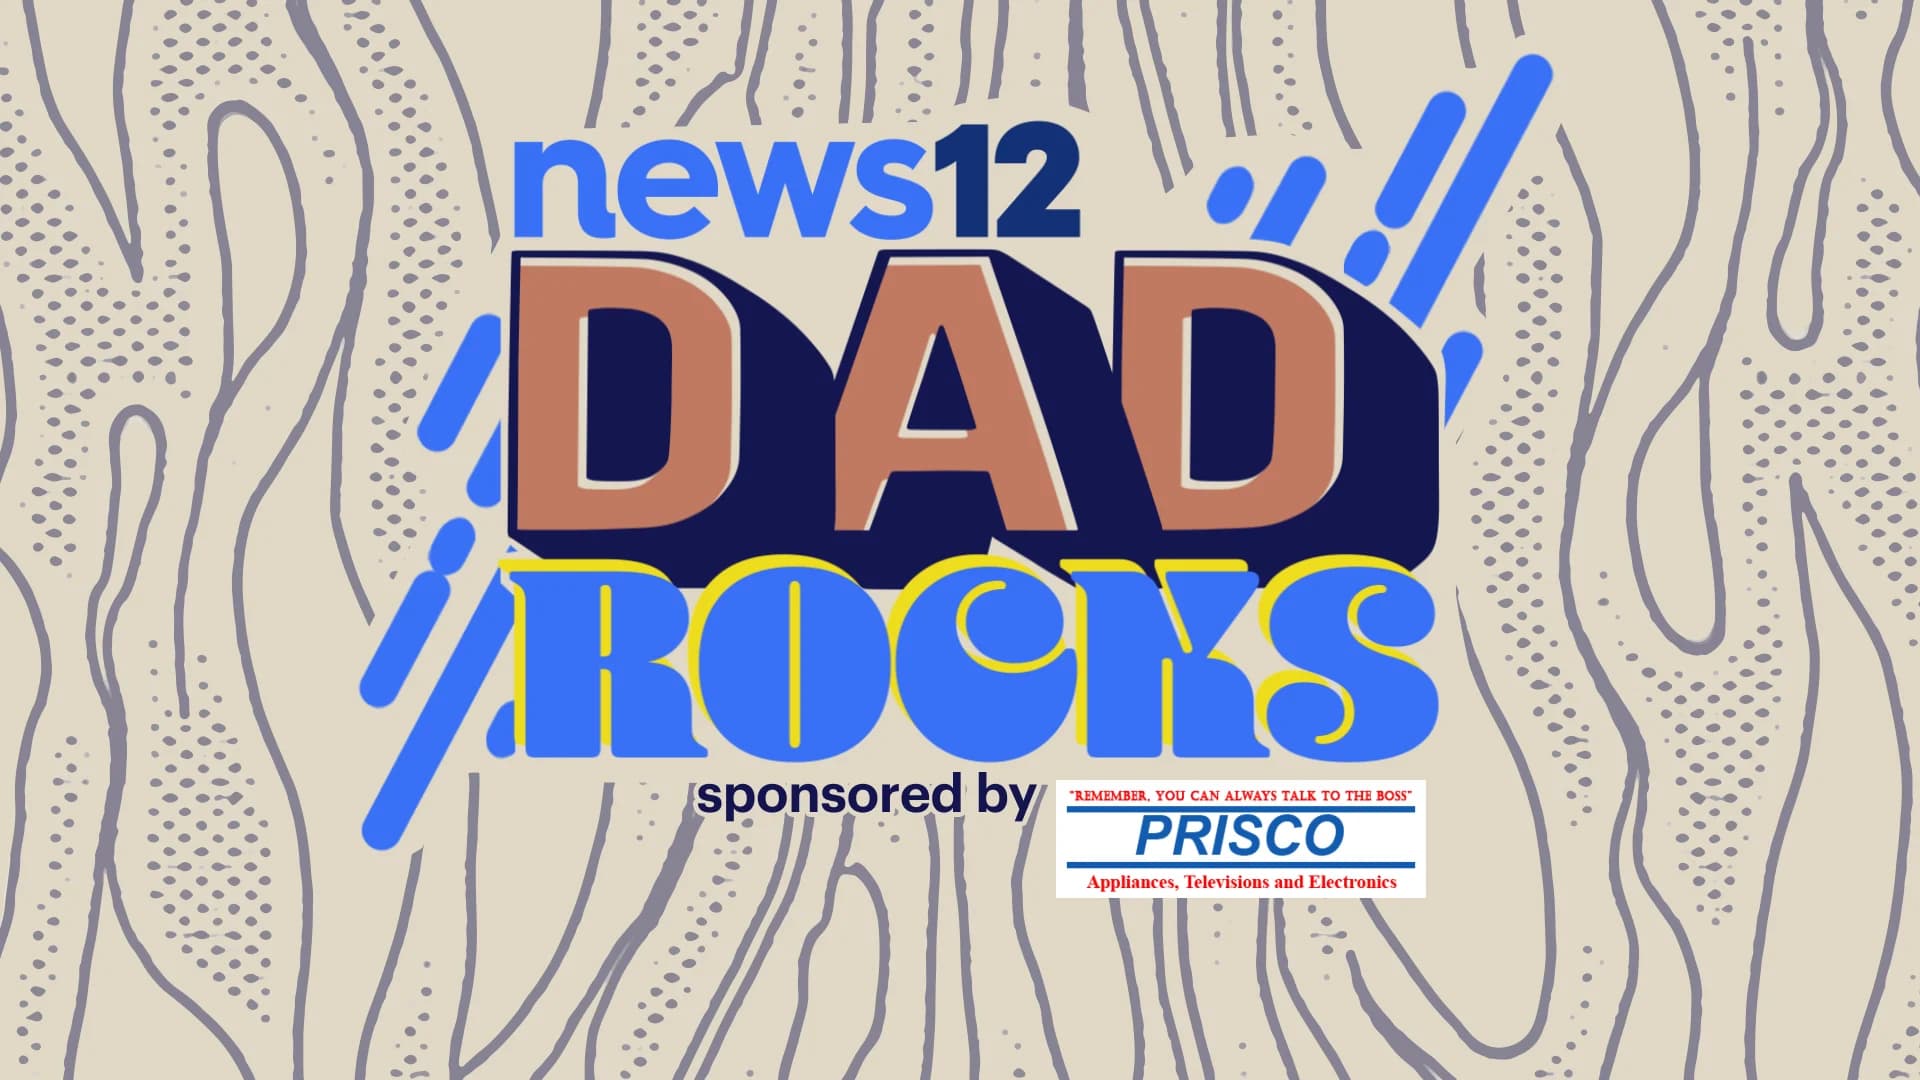 Is your dad awesome? Tell us why your dad rocks!